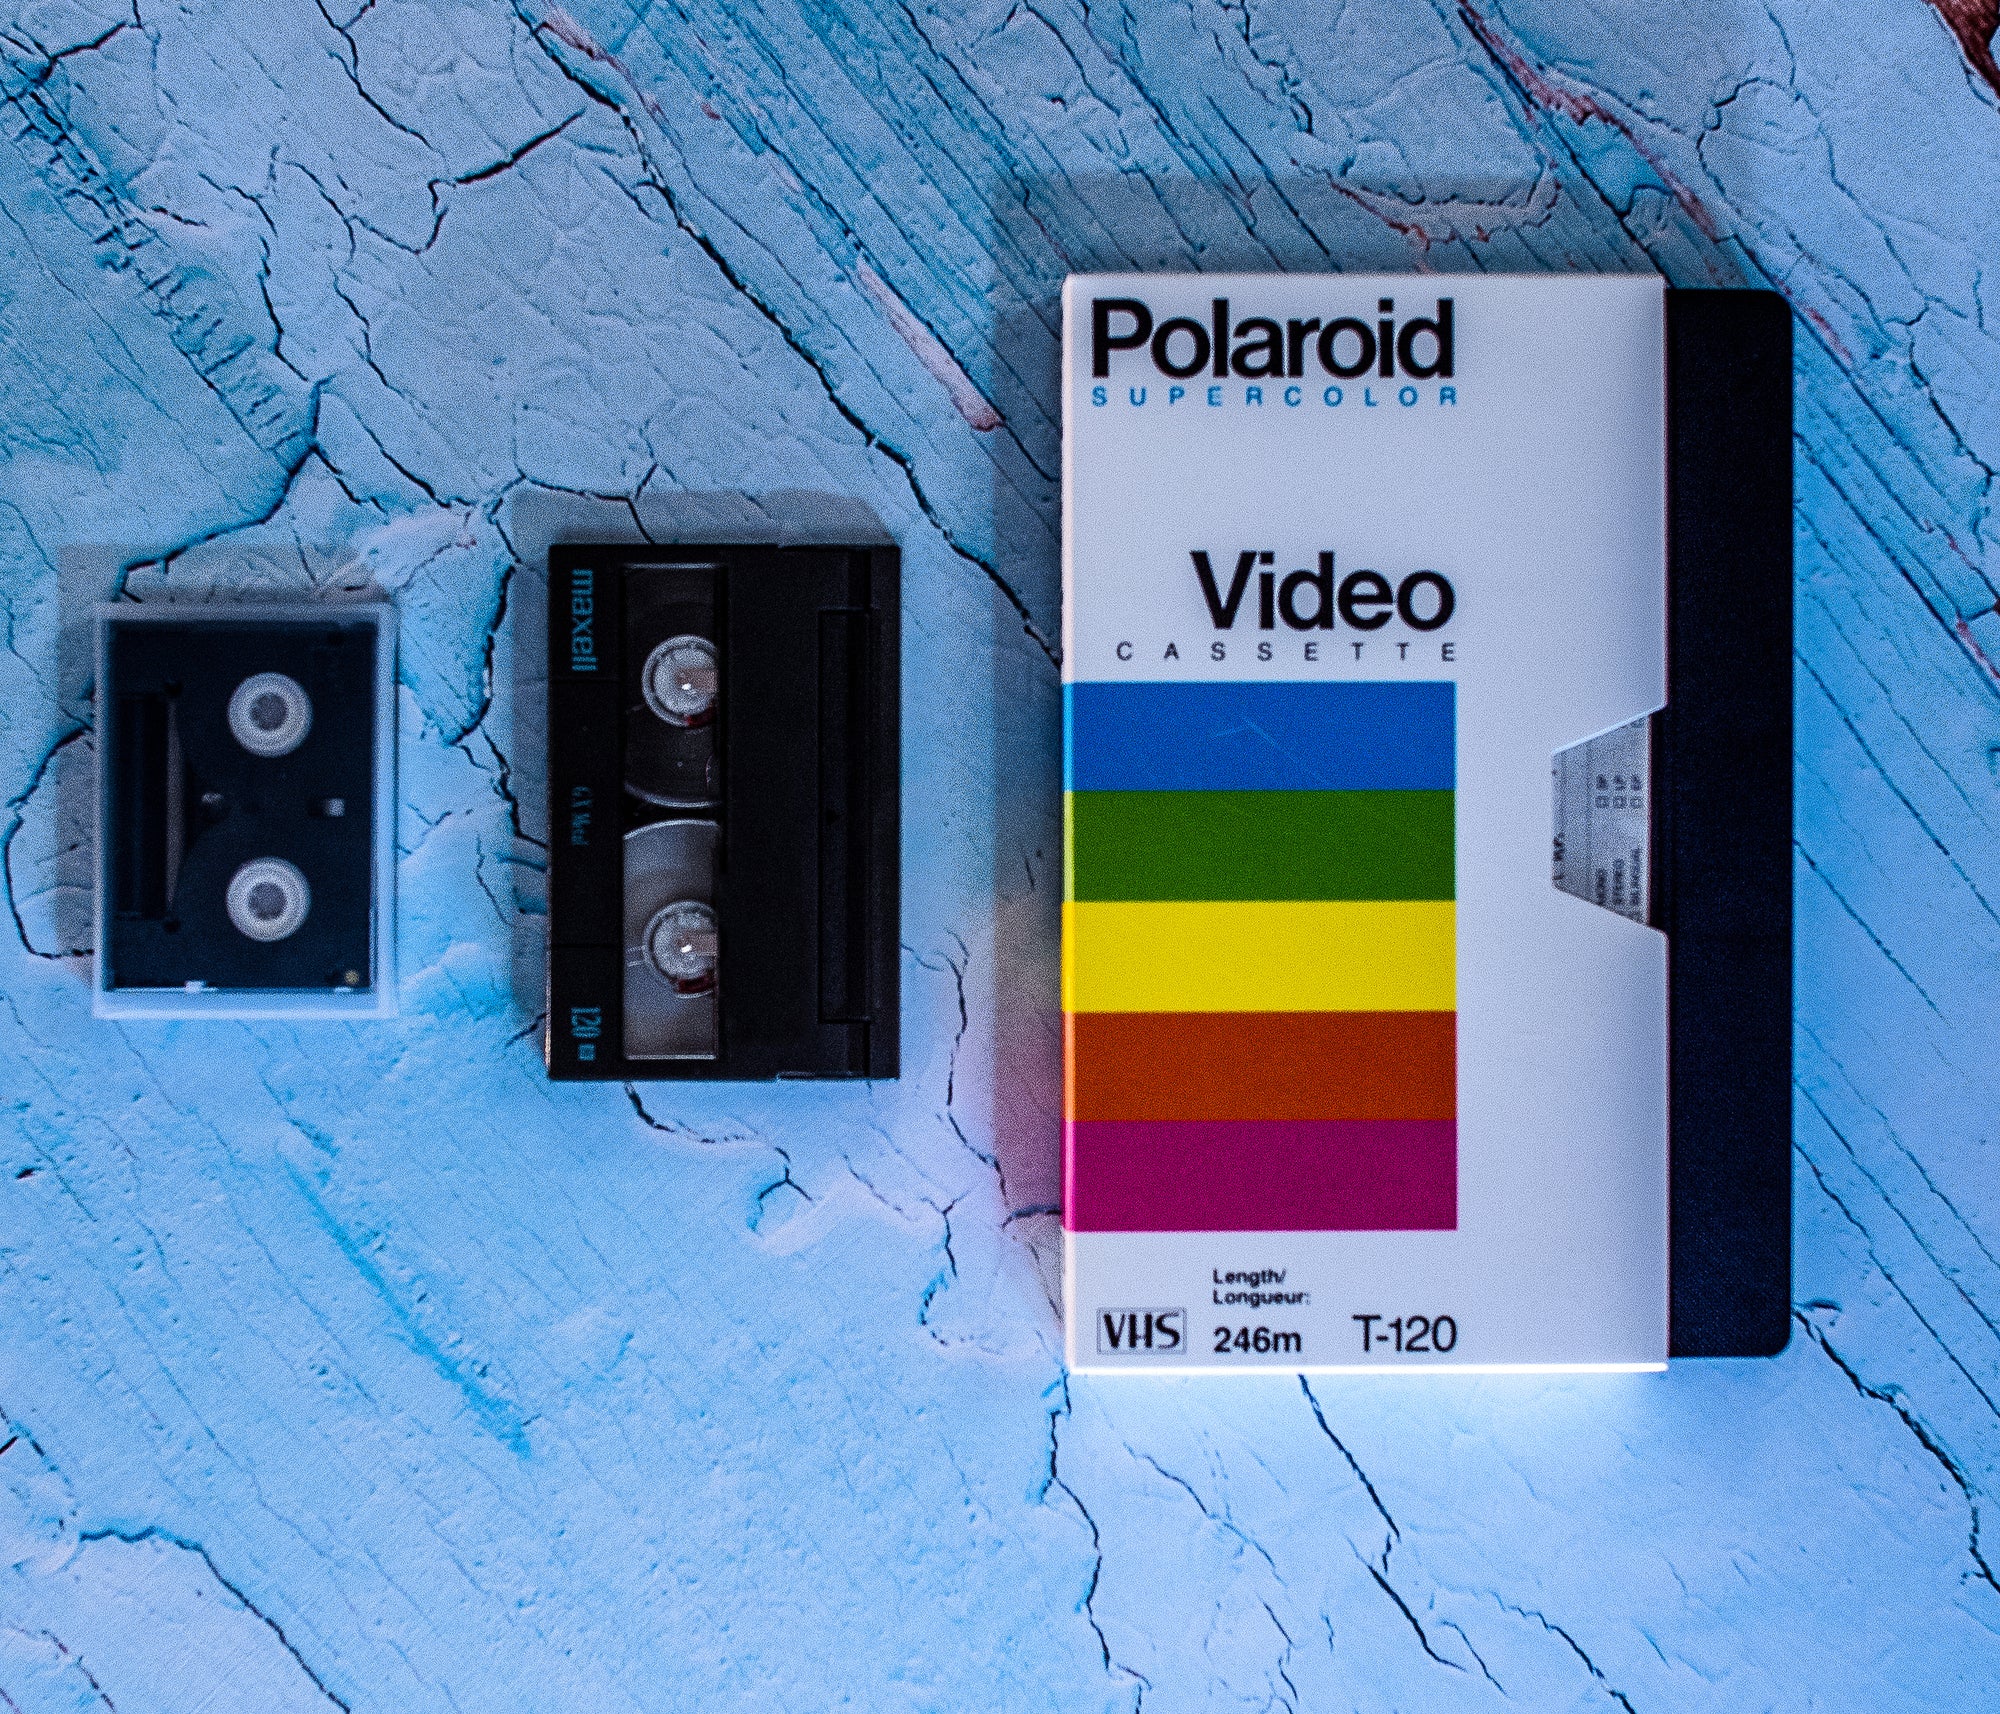 Video tapes.